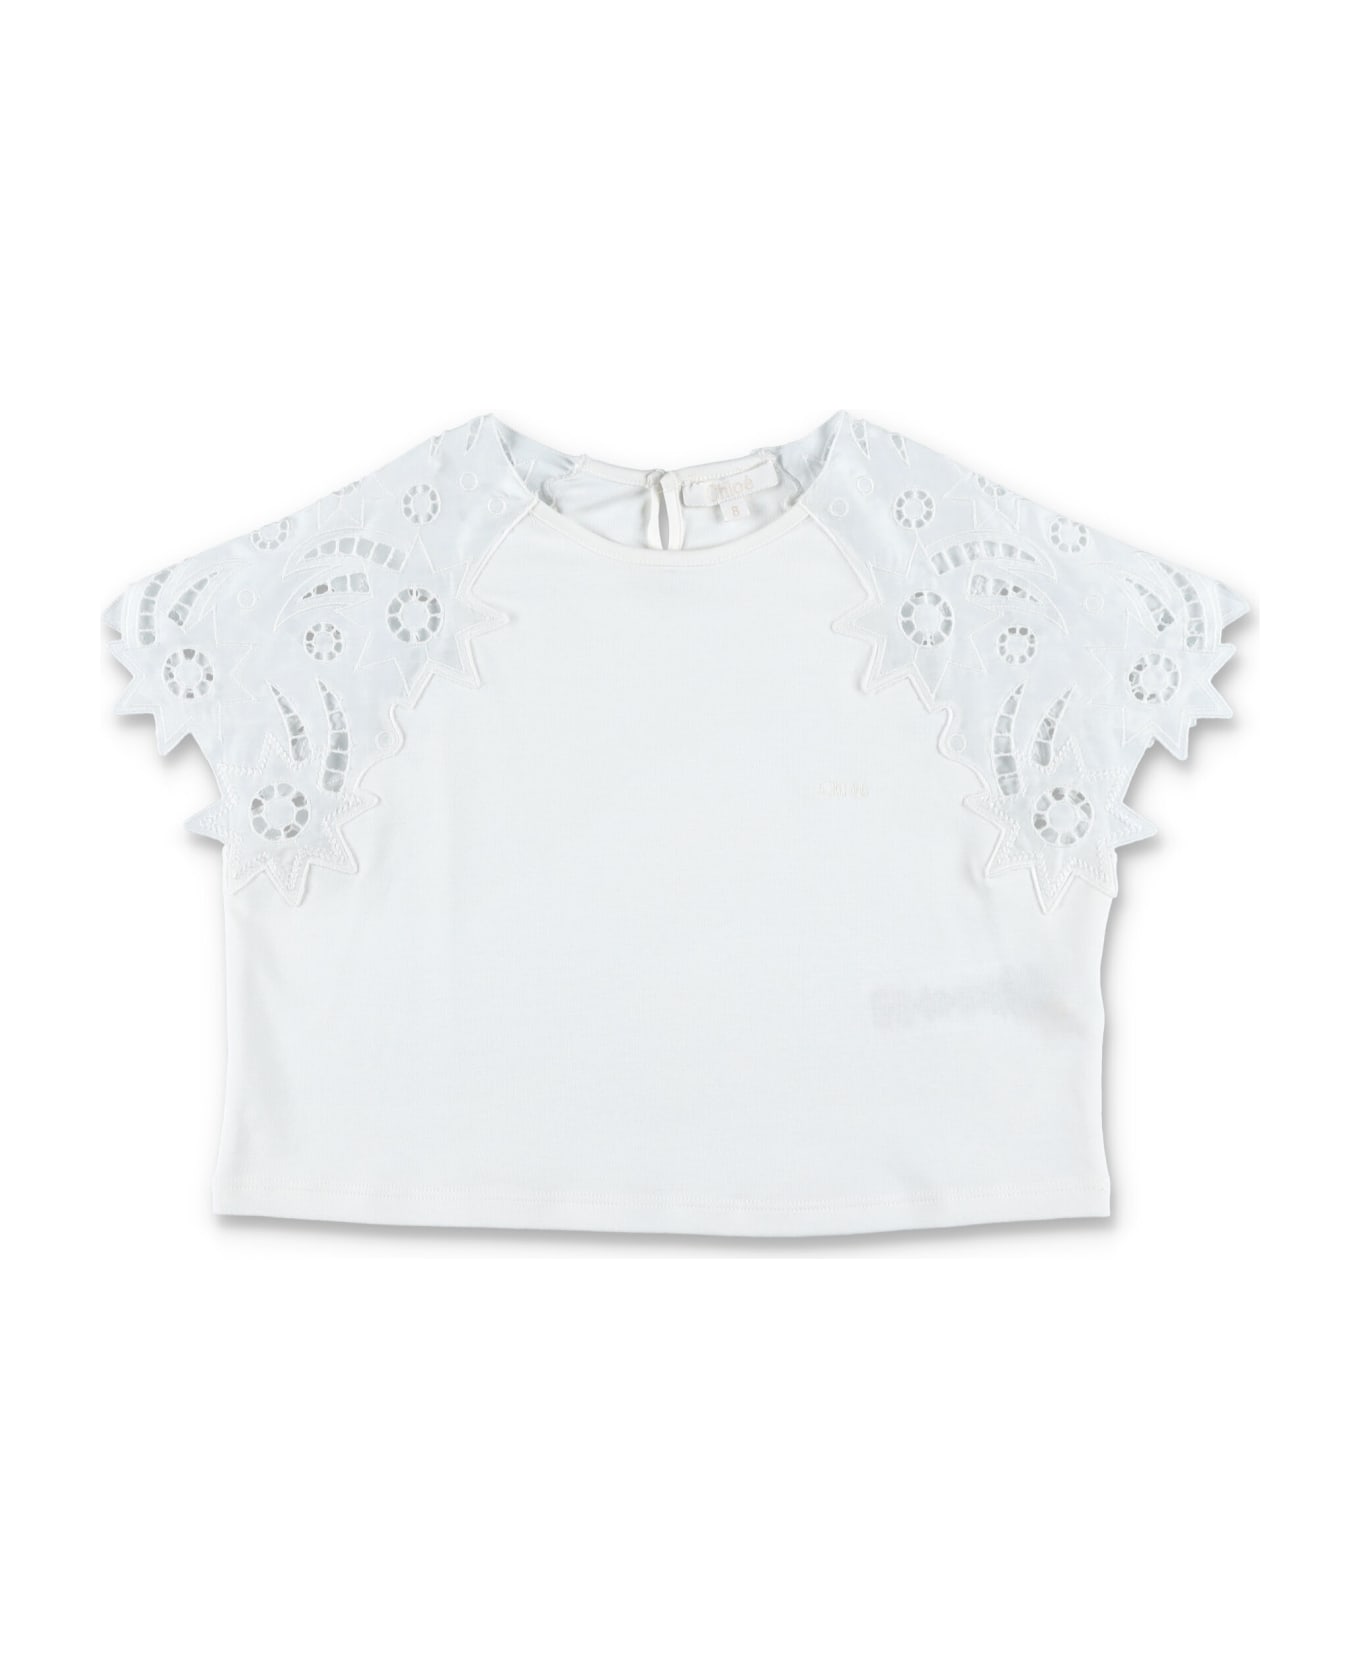 Chloé Embroidered T-shirt - WHITE